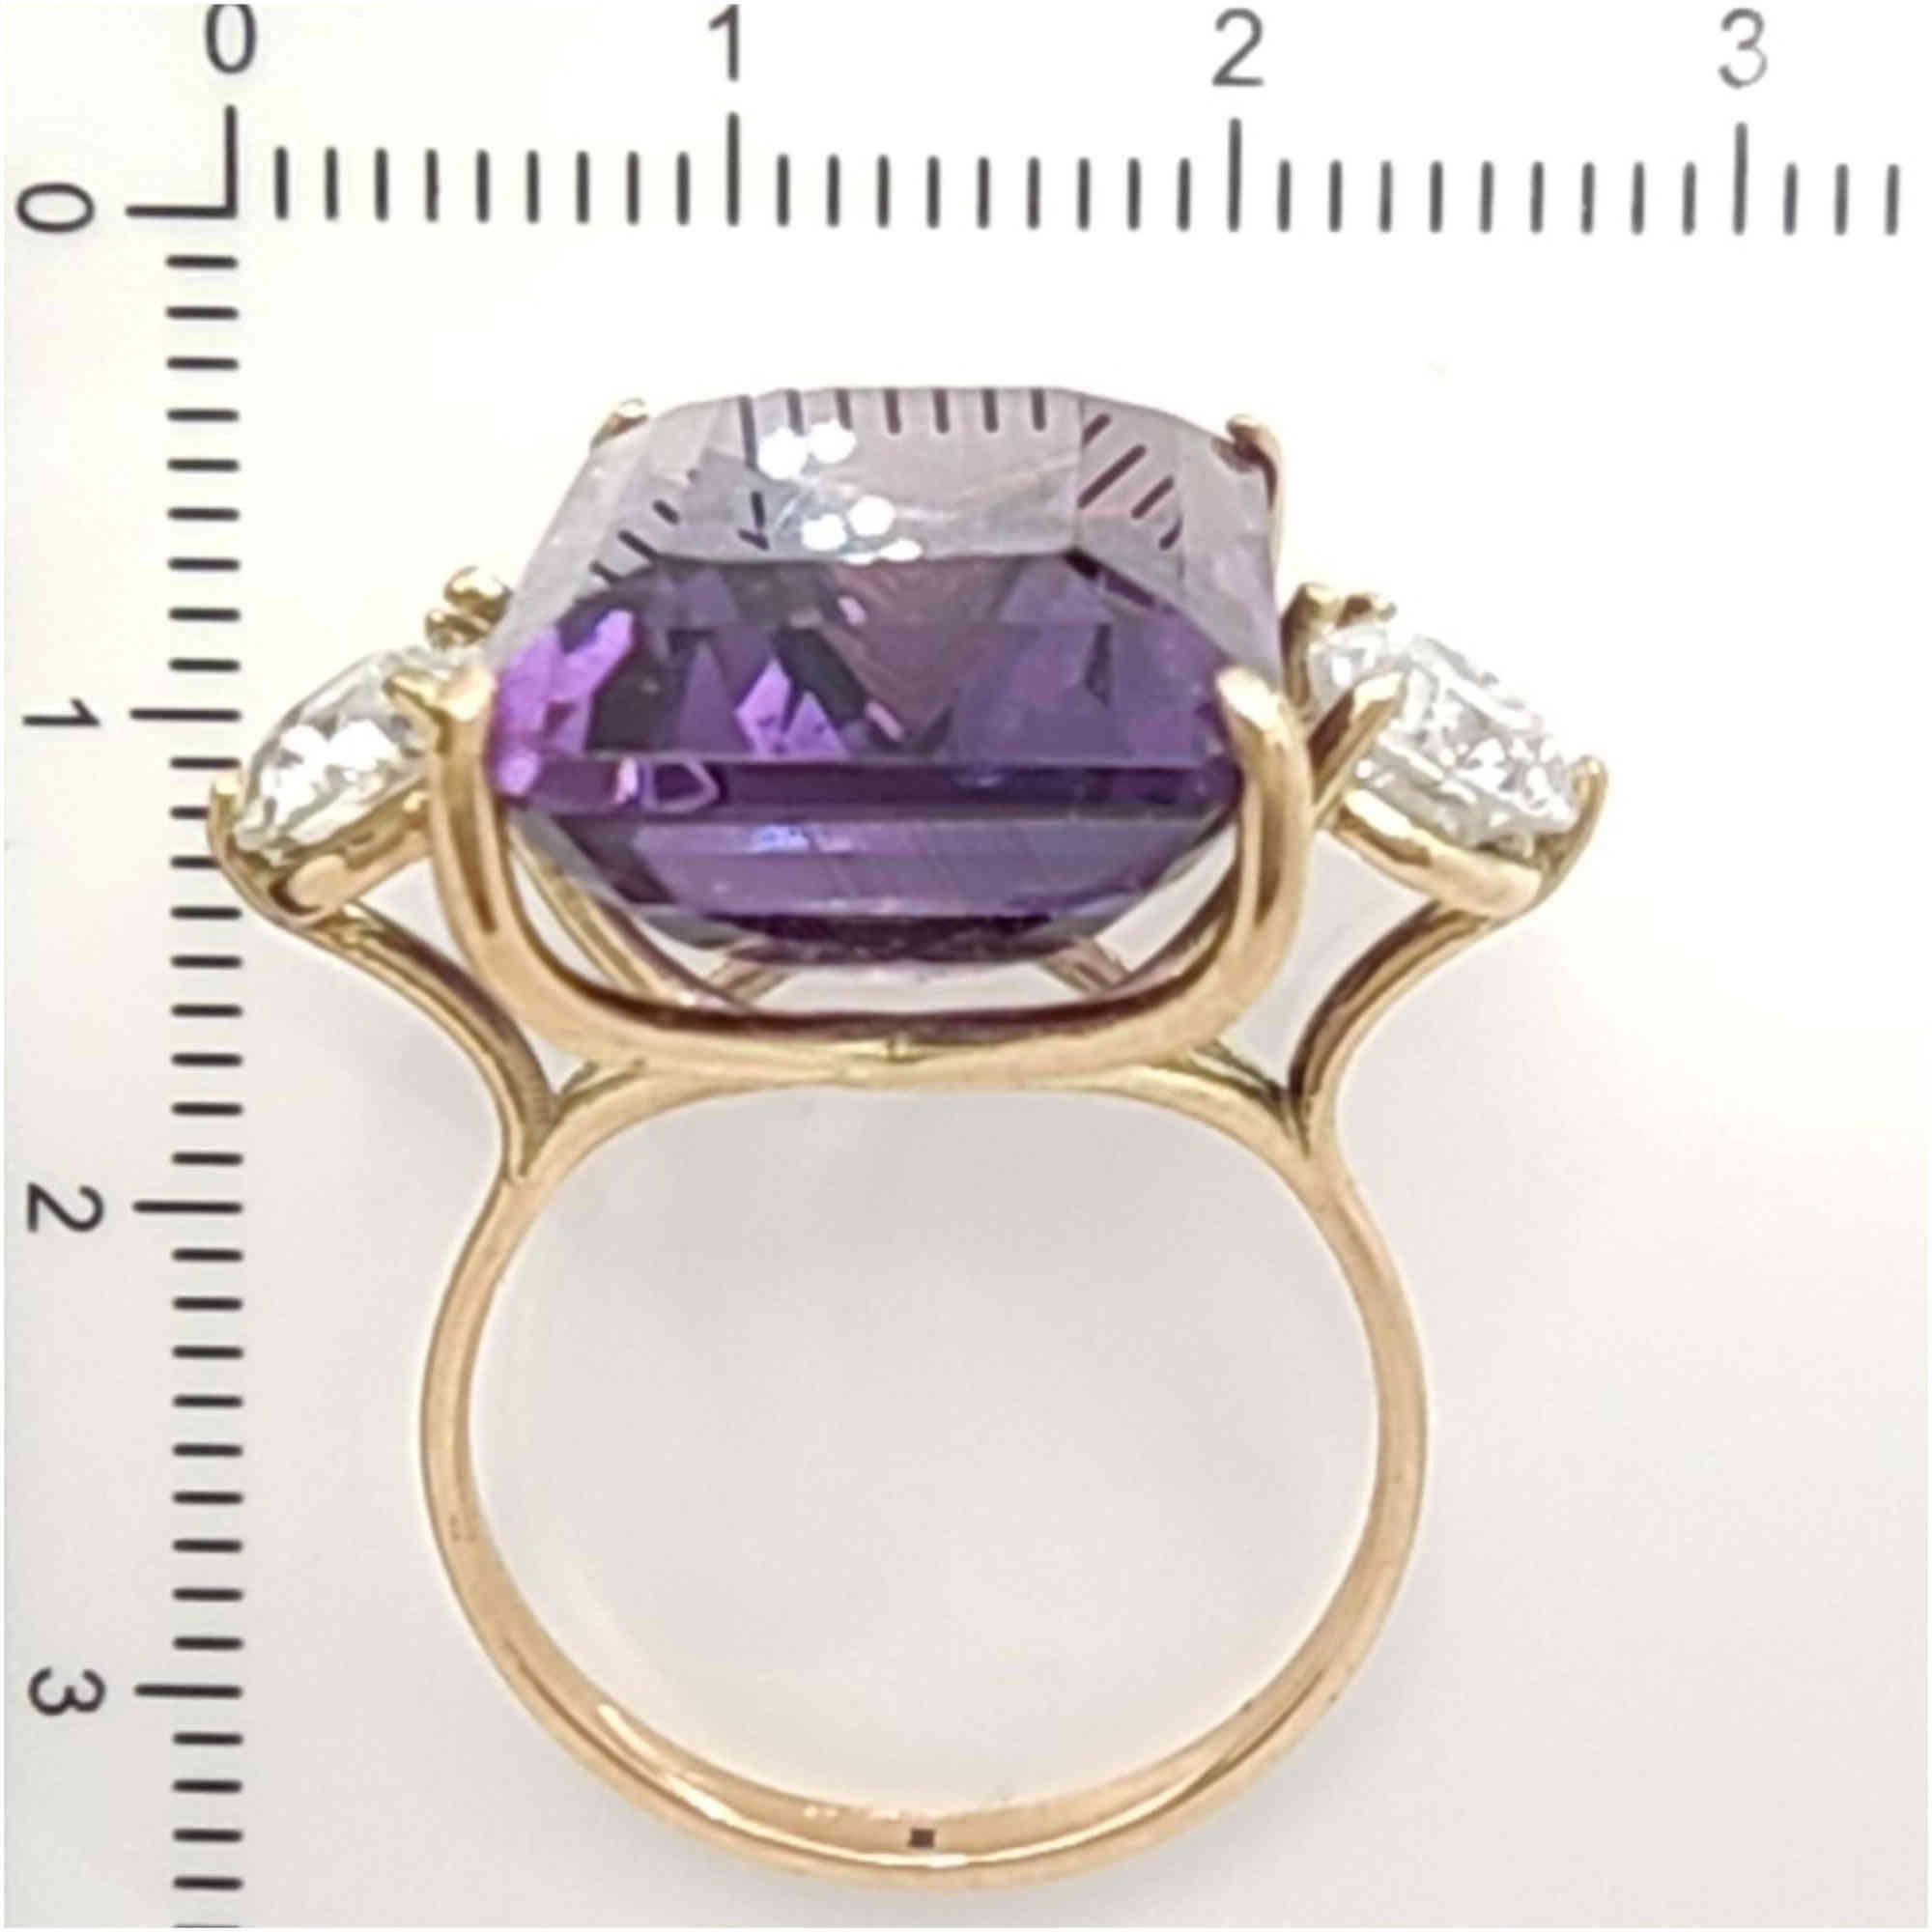 IGE Certified 17.28 Carat Amethyst Diamond Cocktail Ring For Sale 8